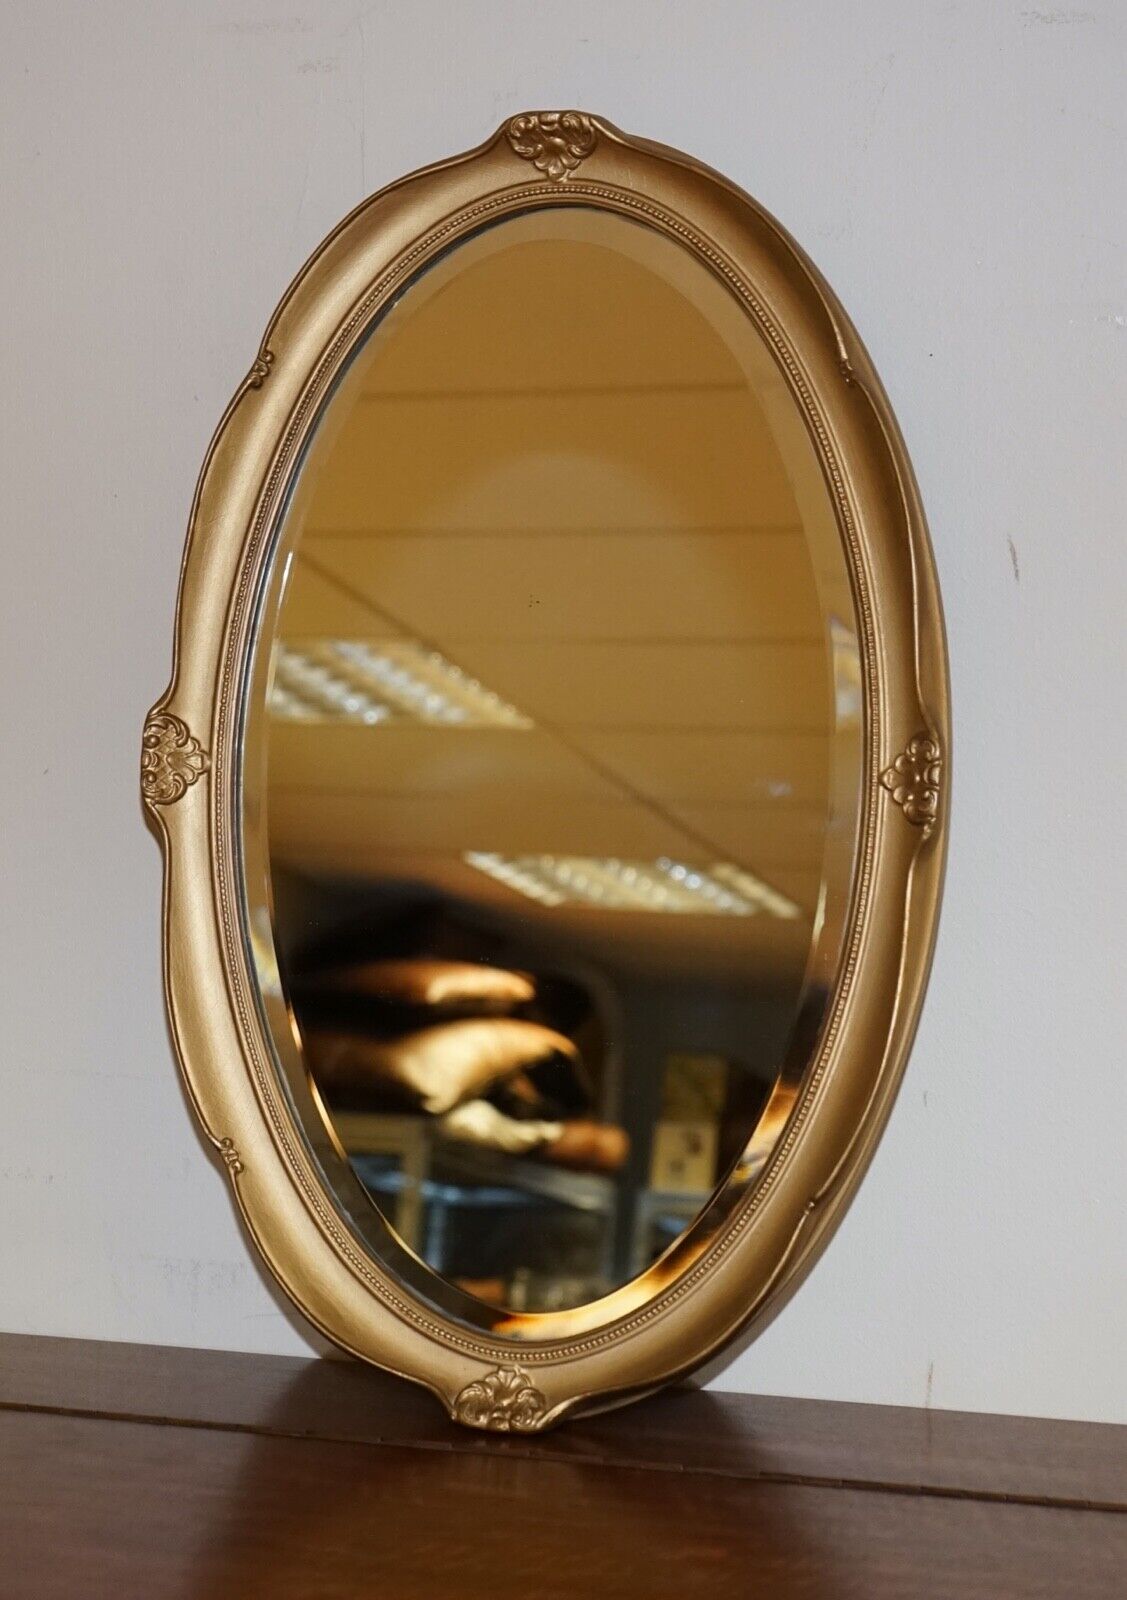 STUNNING VINTAGE GOLD ORNATE OVAL WALL MIRROR